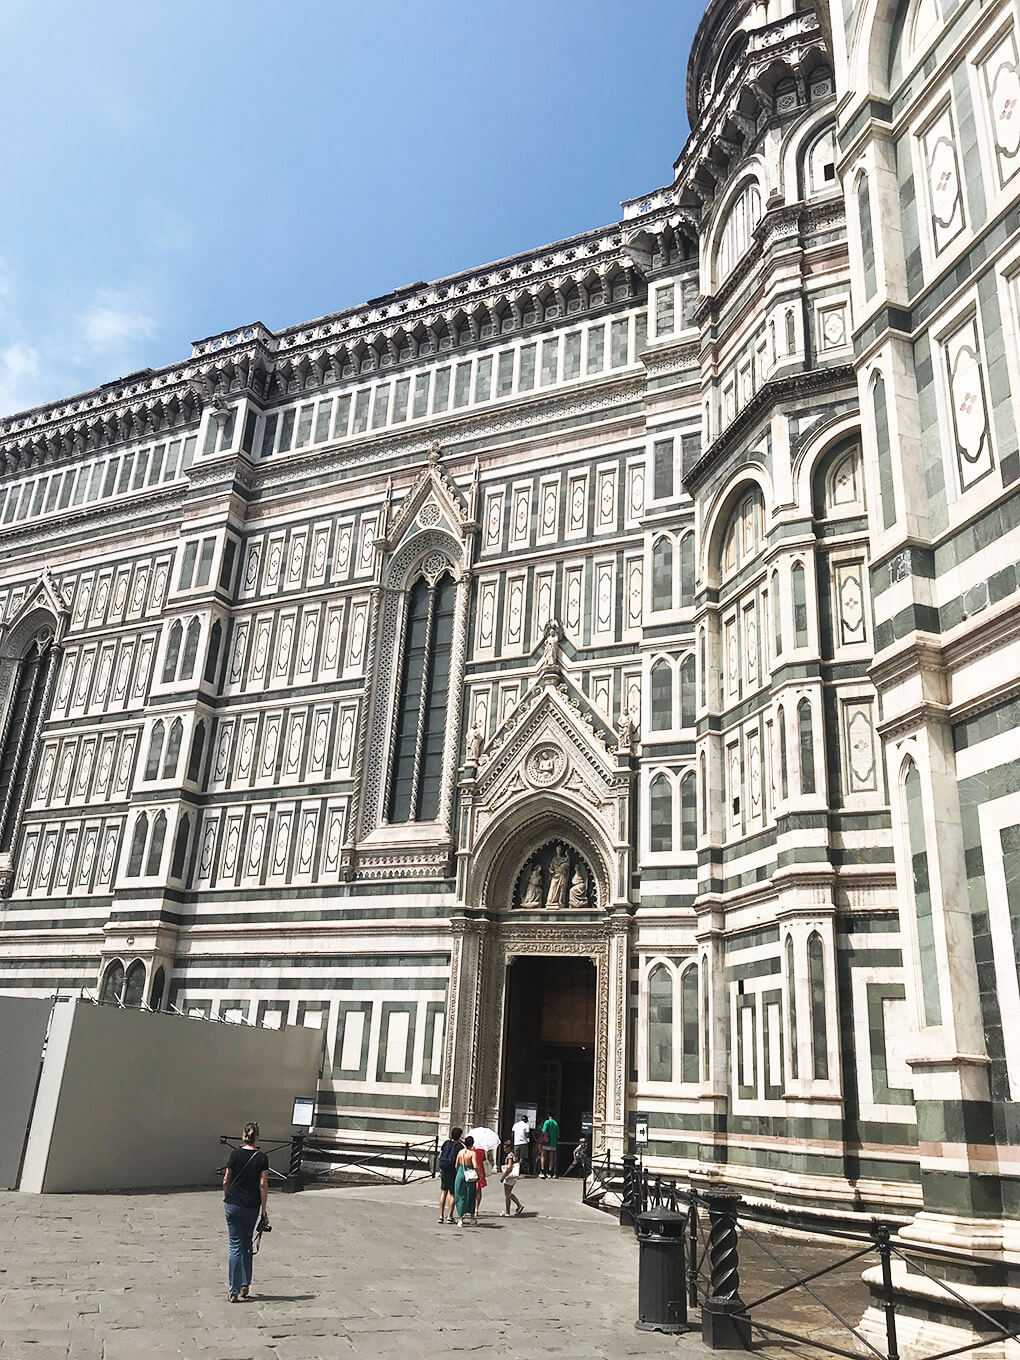 Top 17 Things from Italy www.sarahkayhoffman.com Florence #travel #italy